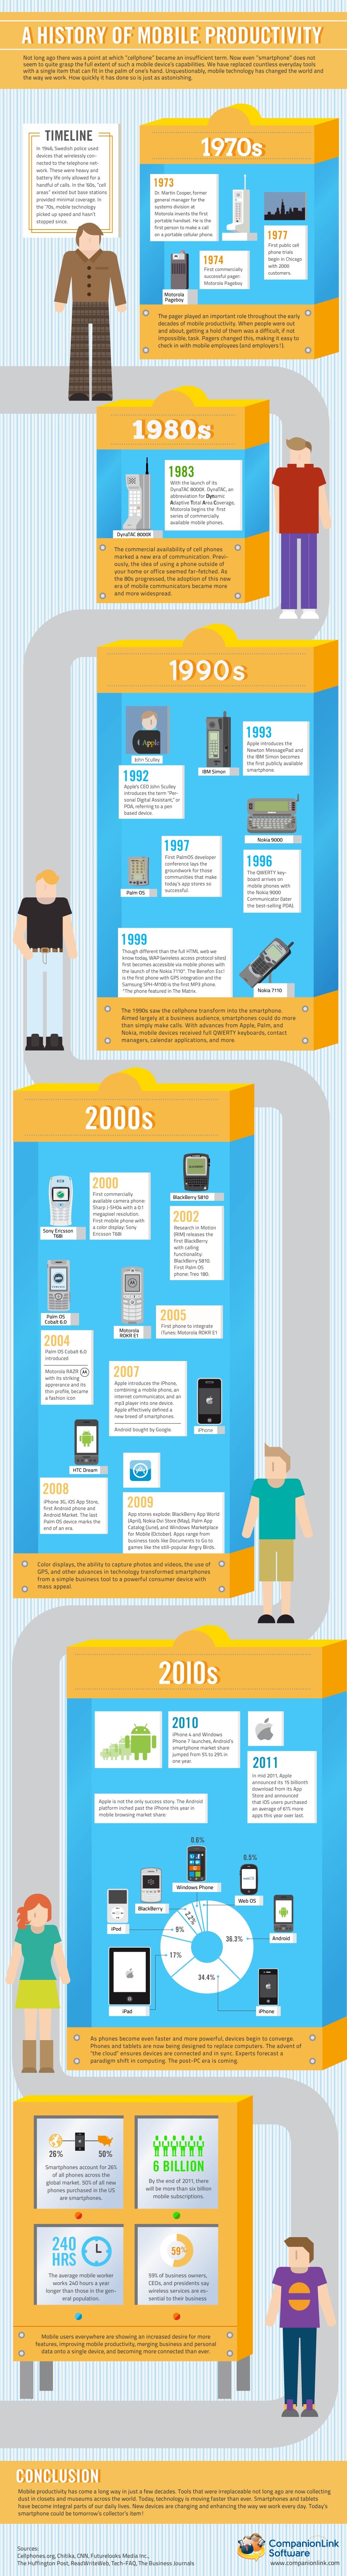 Take a trip through the history of mobile productivity with this infographic